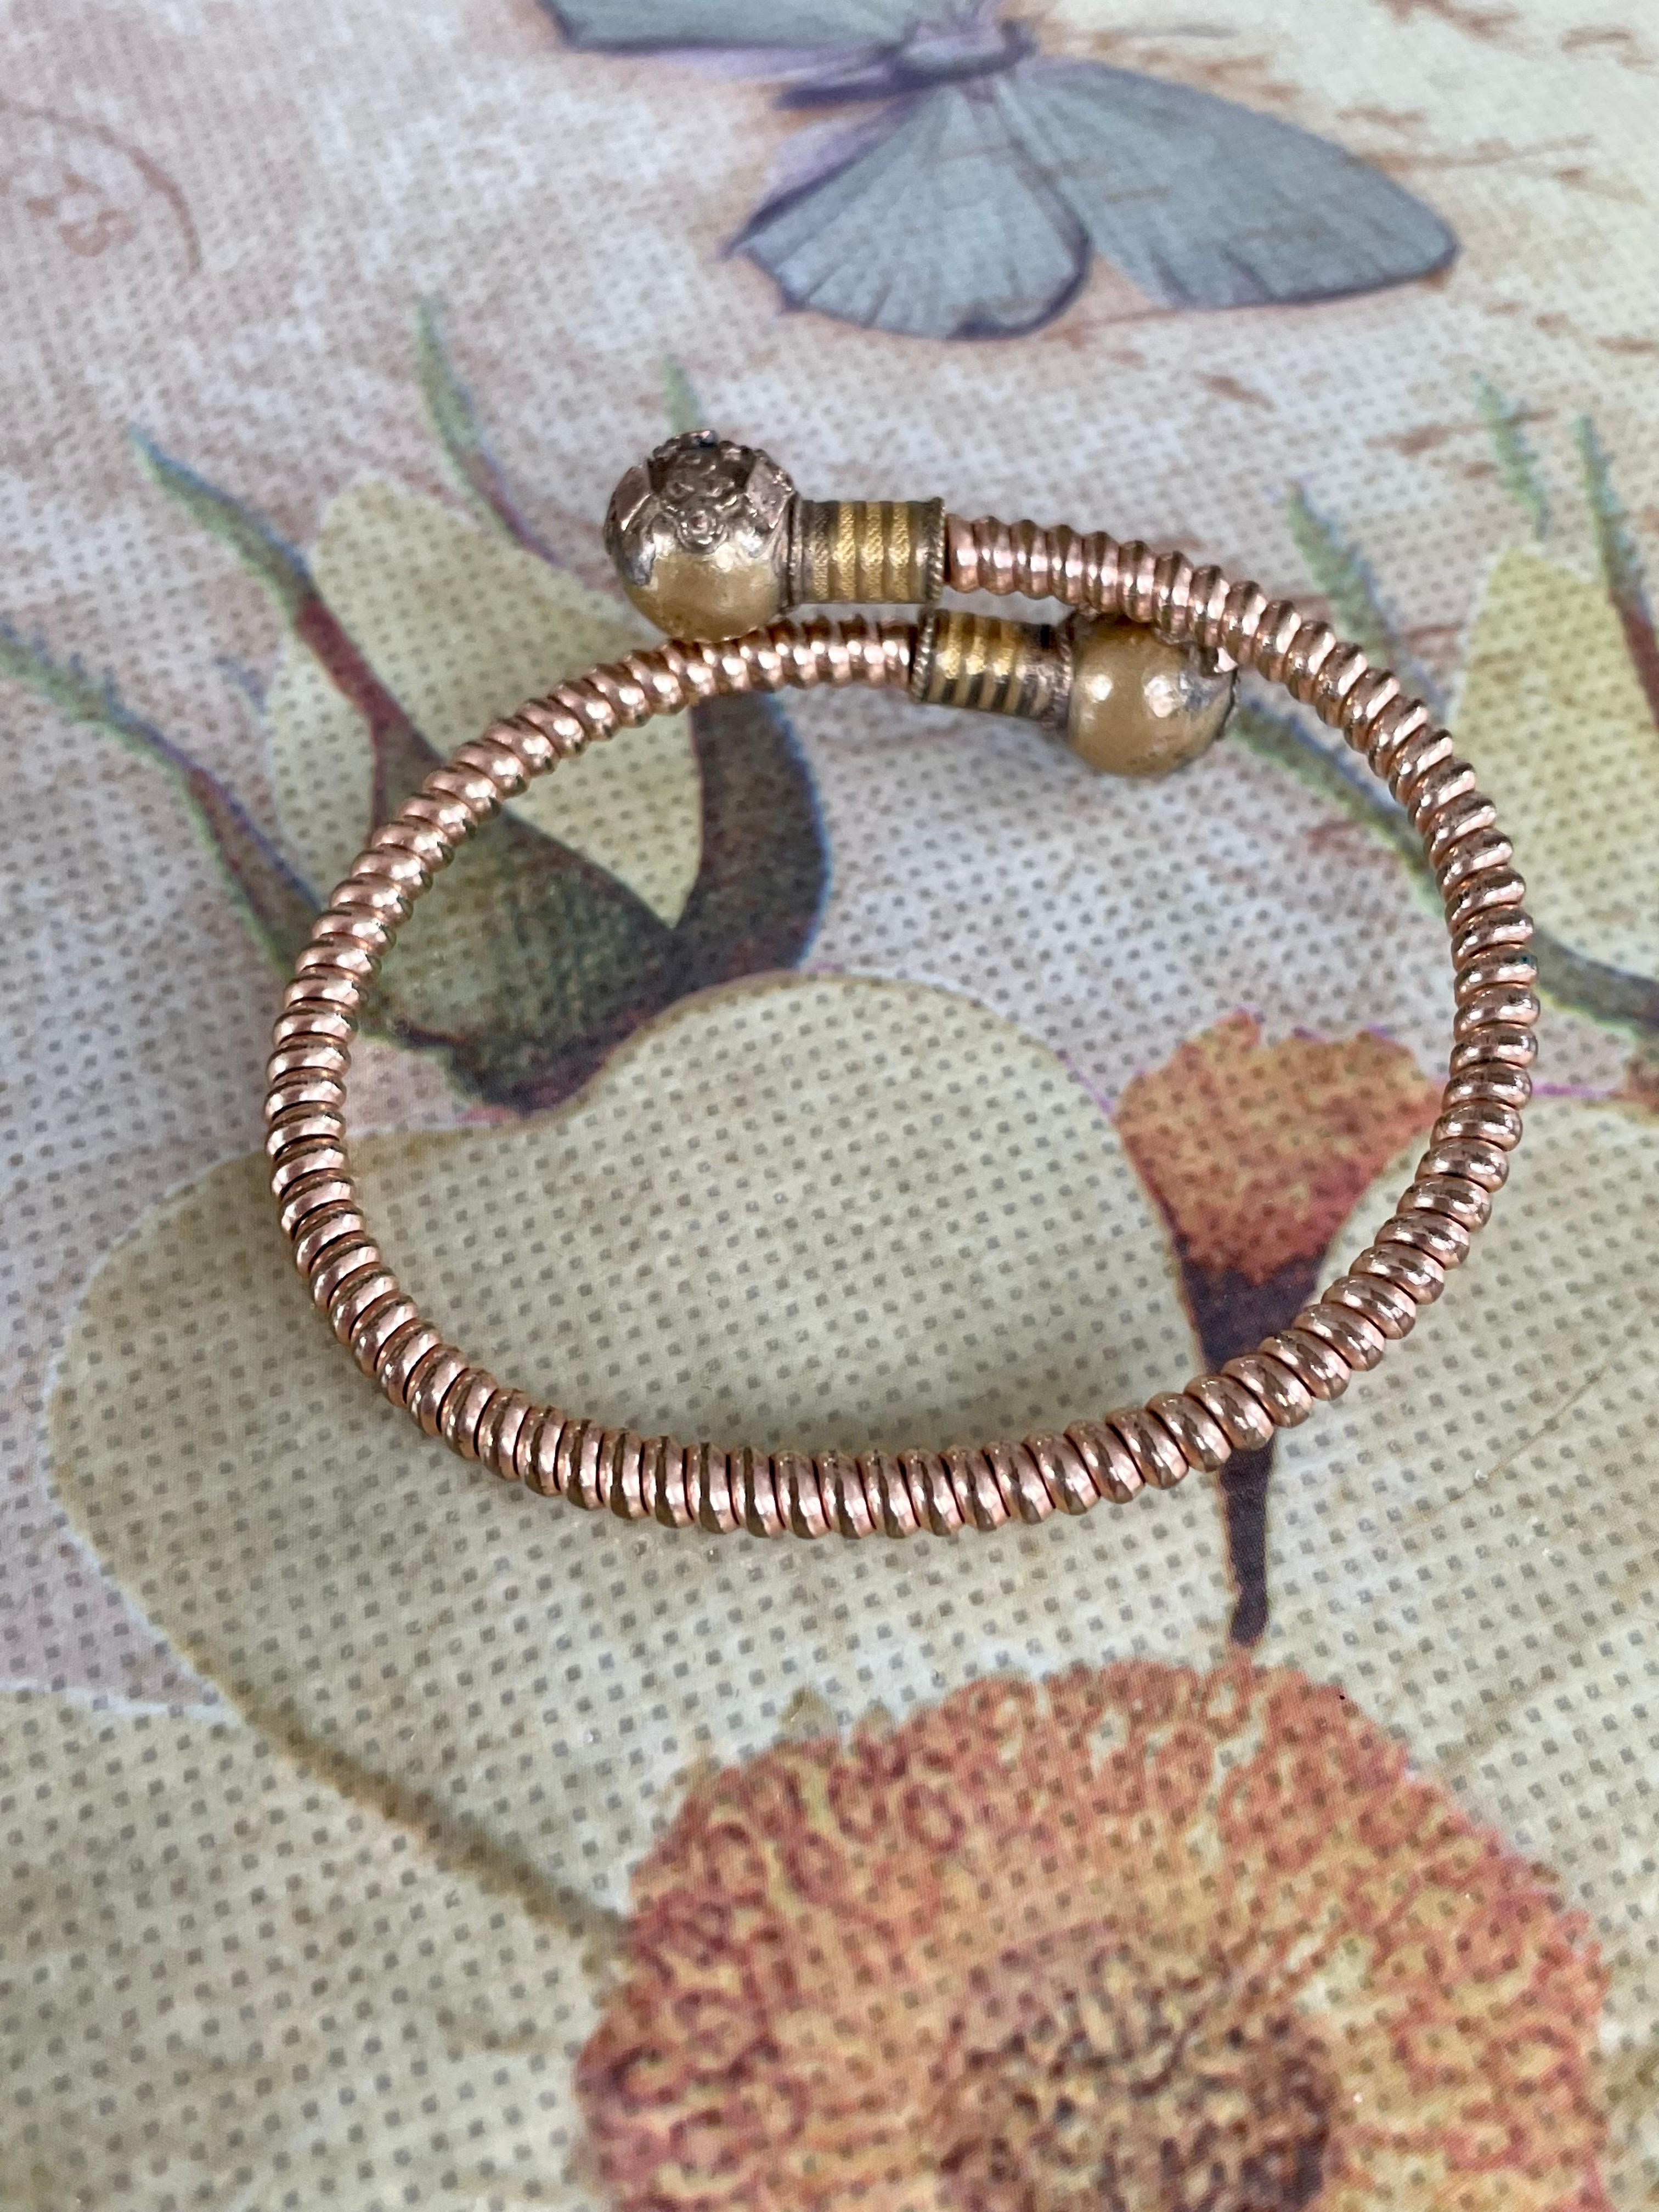 This Victorian flexible coil wrap bracelet resembles a snake wrapped around your wrist. It's sure to draw attention.  Size is very adaptable to most any size wrist due to the nature of flex in the bracelet.

This piece is Gold-filled.

Flexible